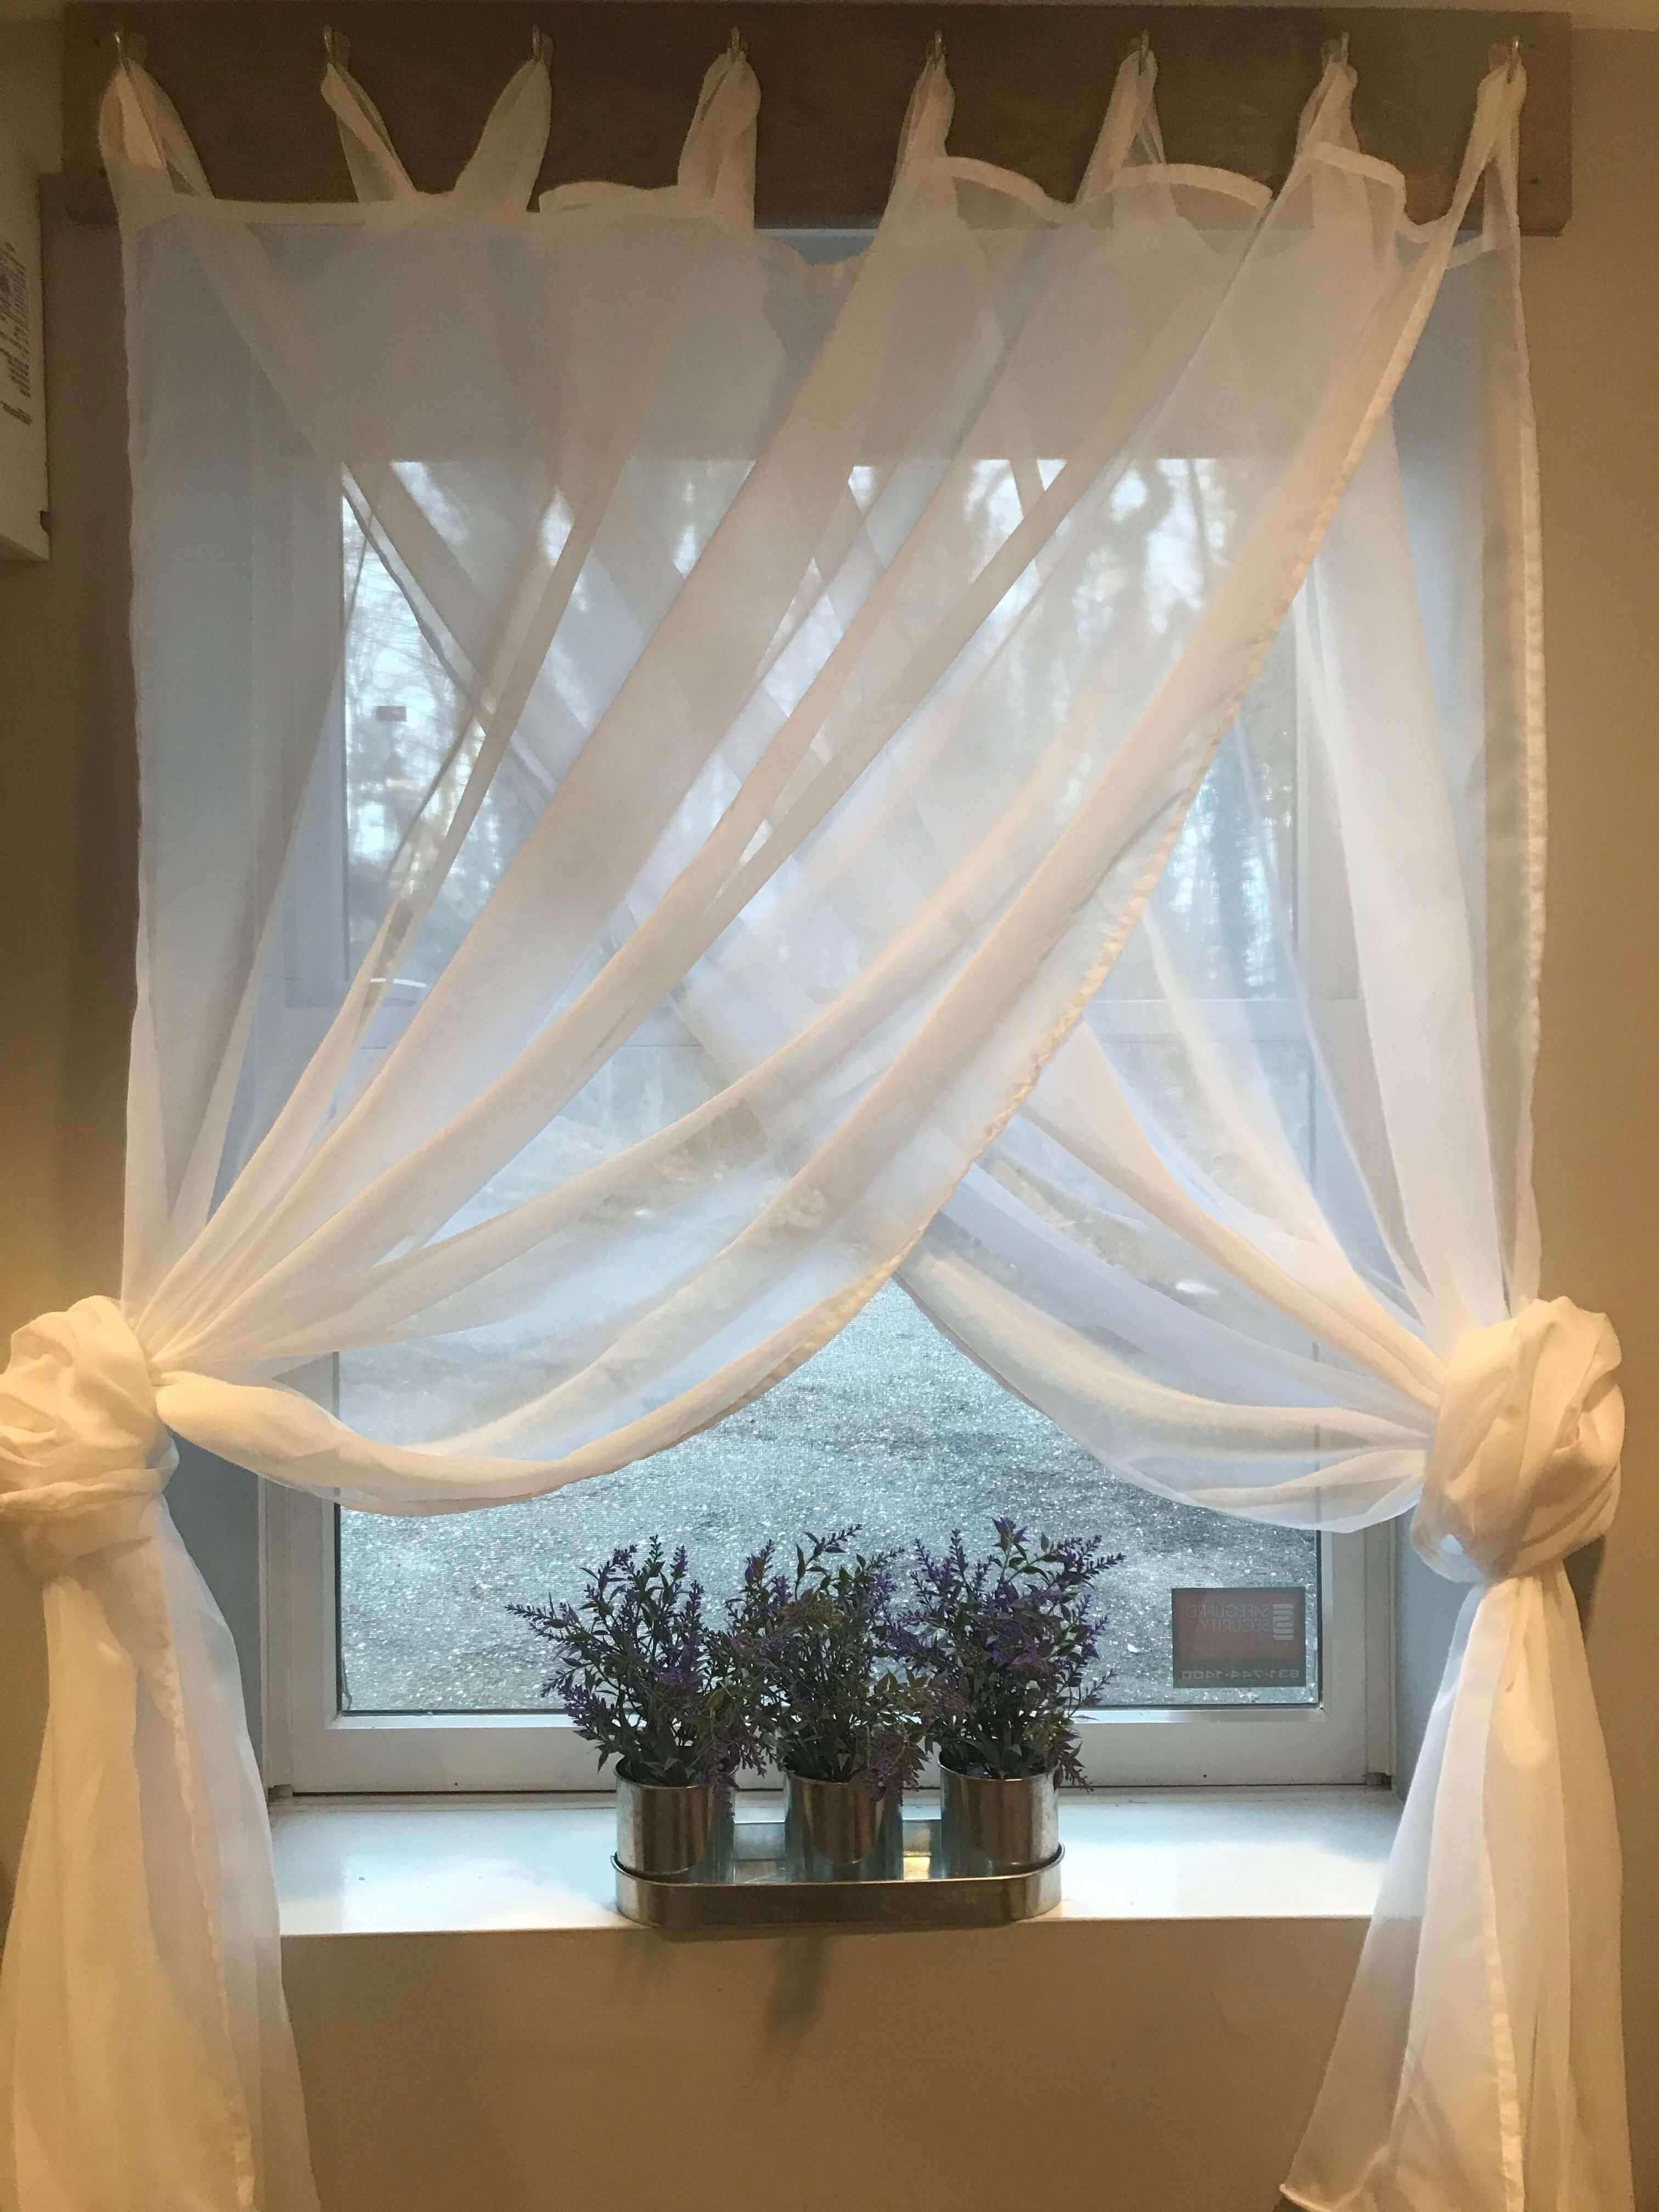 Beyond Windows: Unique And Unconventional Uses For Curtains